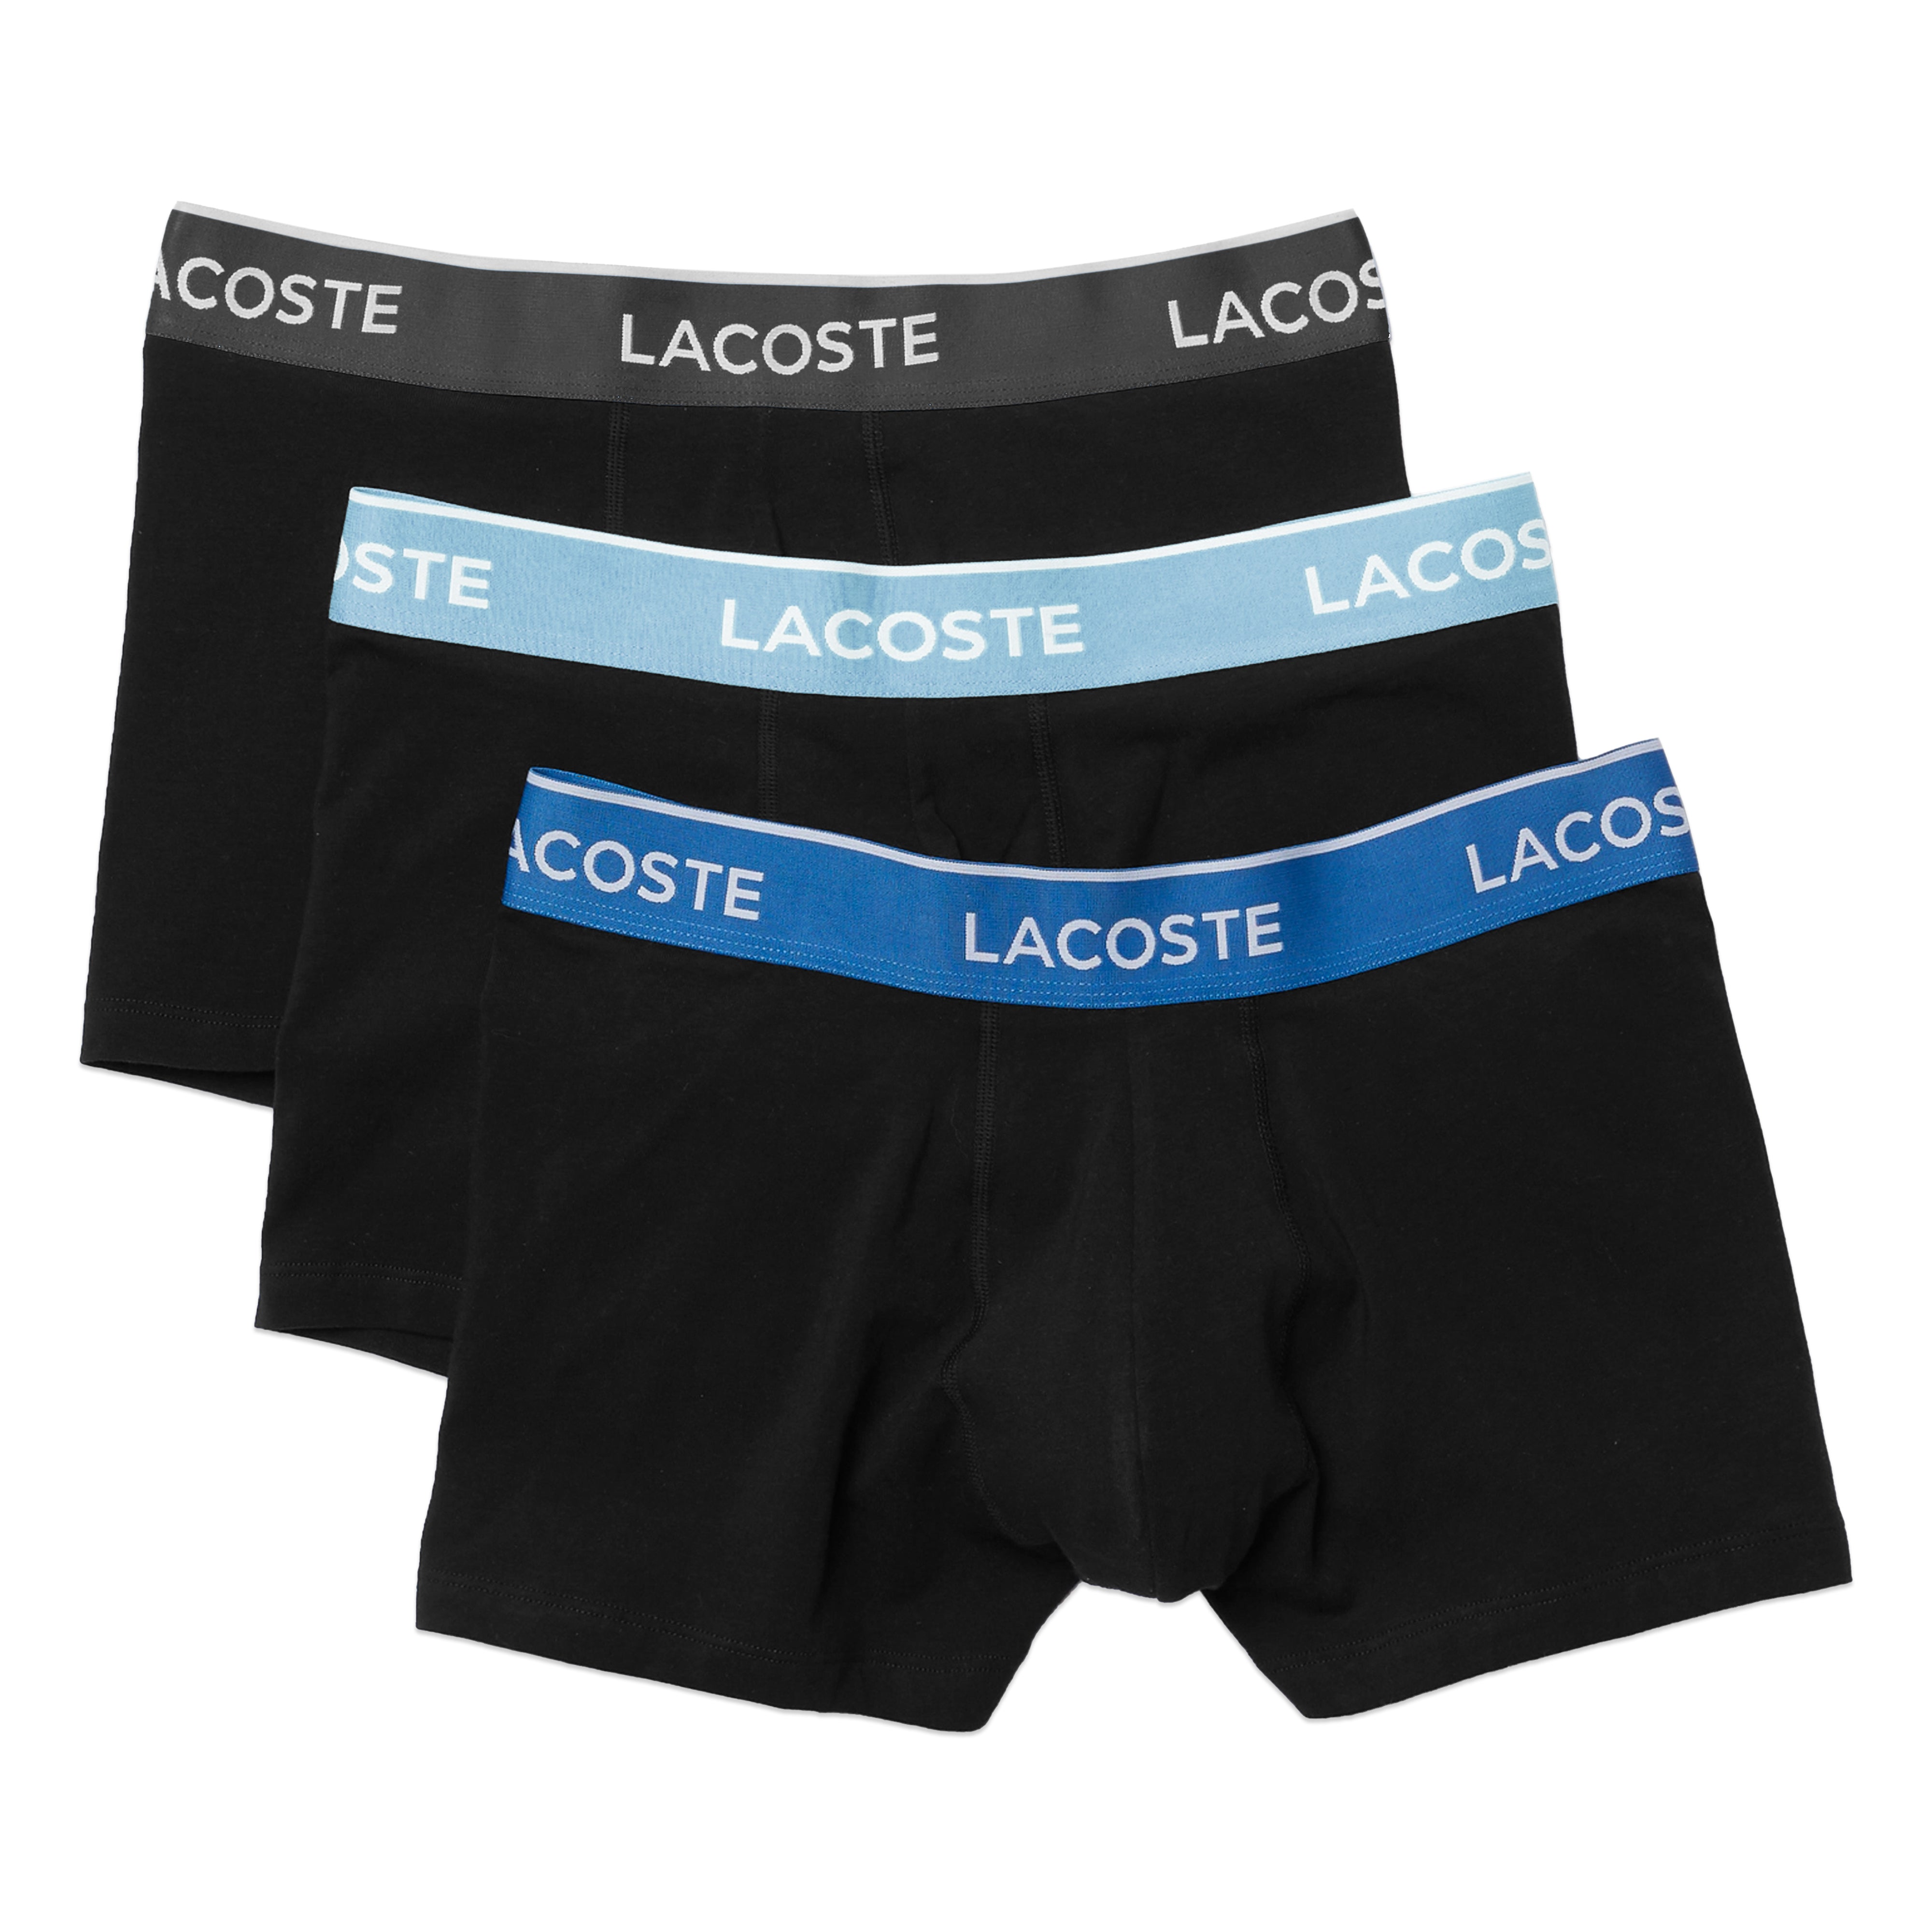 Lacoste 3 Pack Cotton Stretch Trunks 5H3401 - Black with Blue/Sky Blue/Grey